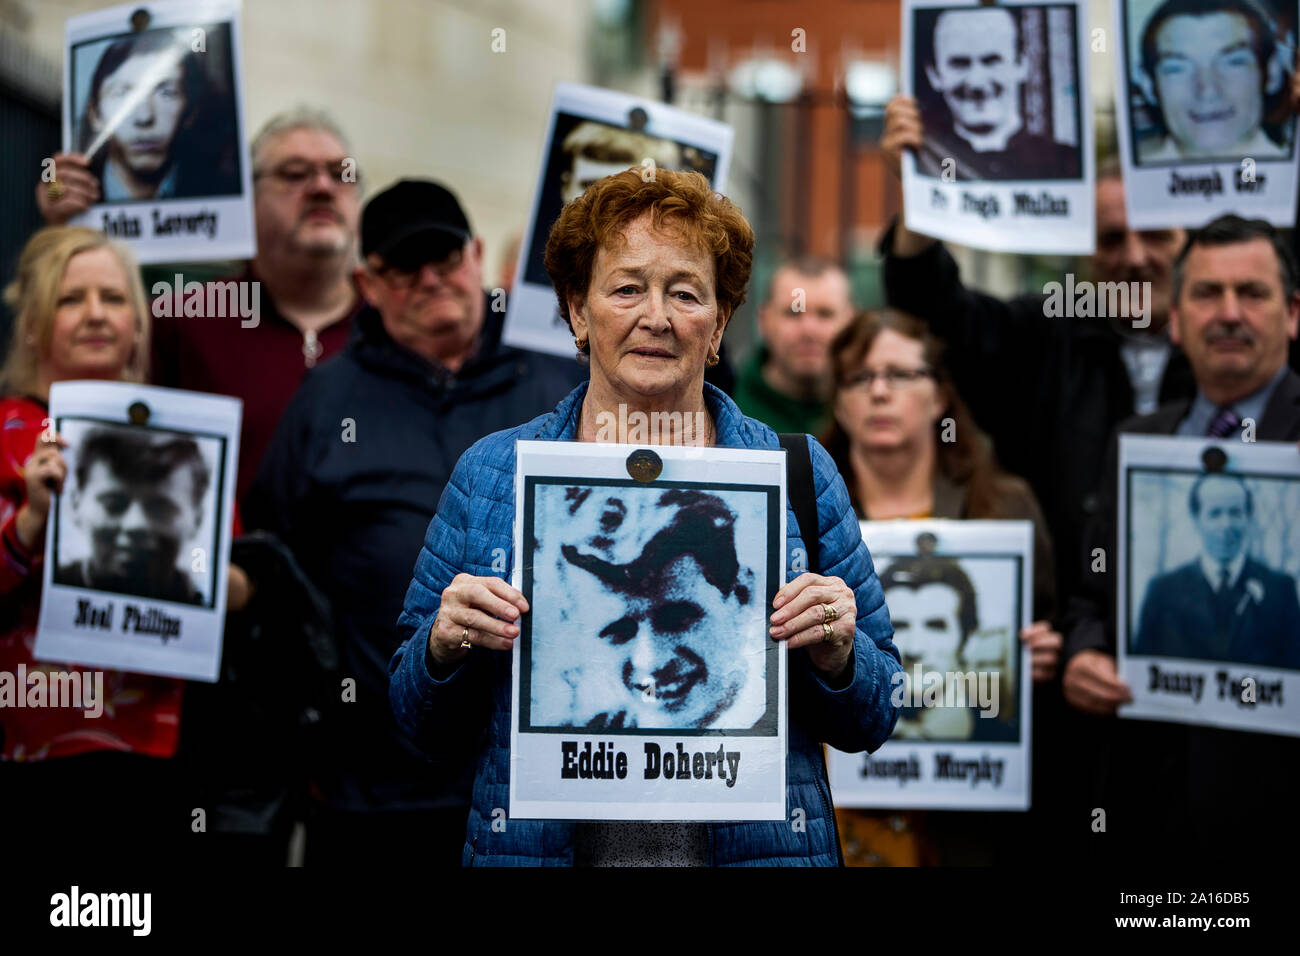 Kathleen McCarry holds an image of her late brother Eddie Doherty, who died during the disputed series of shootings in the Ballymurphy area of Belfast in August 1971. Mrs McCarry is accompanied by other families and supporters of those who died during the shootings outside Laganside Courts. Stock Photo